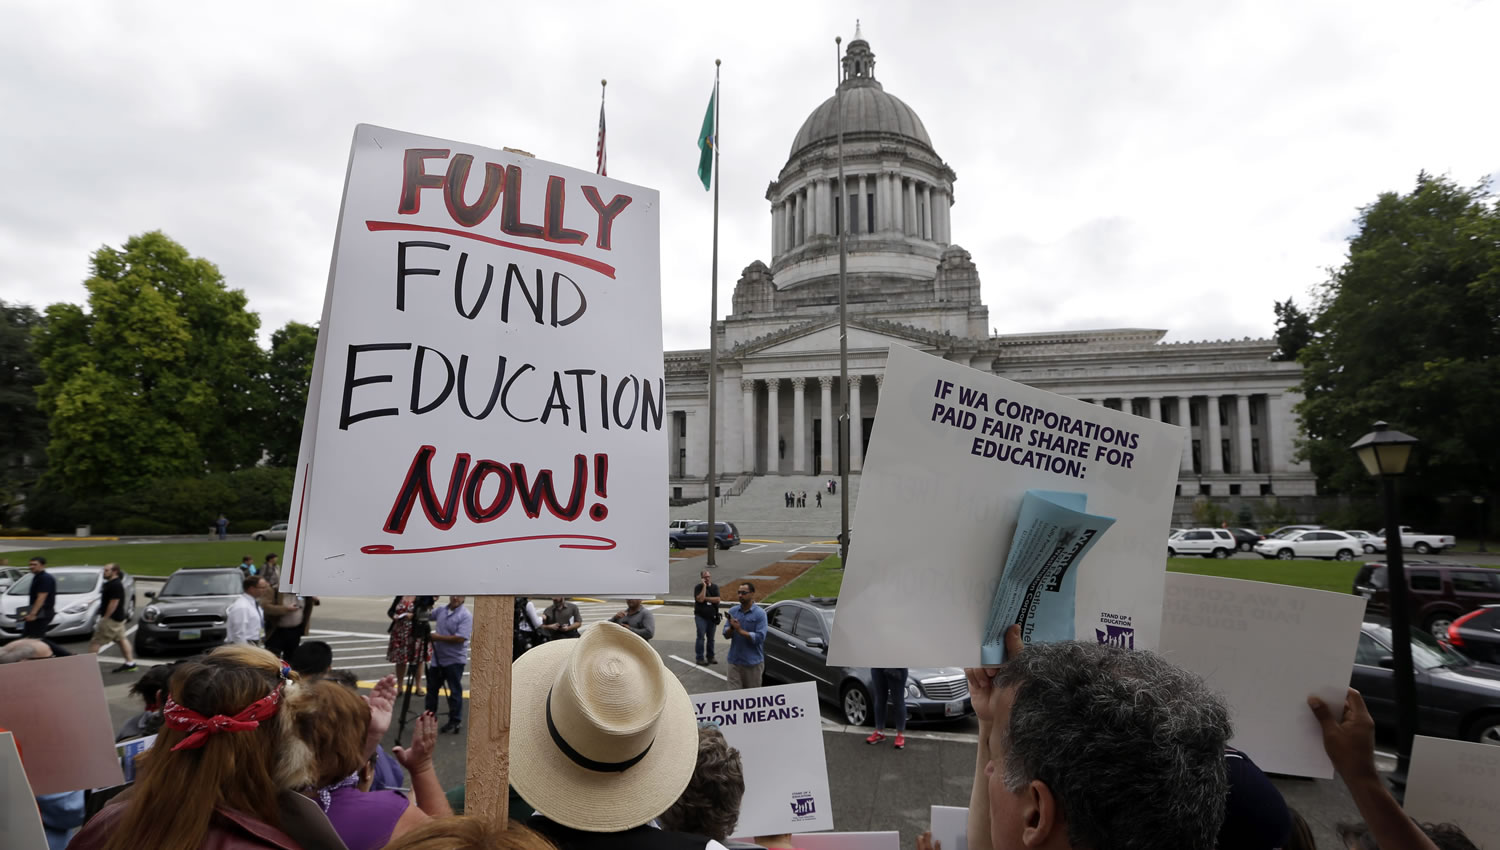 A small group of demonstrators stand on the steps of the Temple of Justice and in view of the Legislative Building on Wednesday in Olympia as they advocate for more state spending on education prior to a hearing before the state Supreme Court.